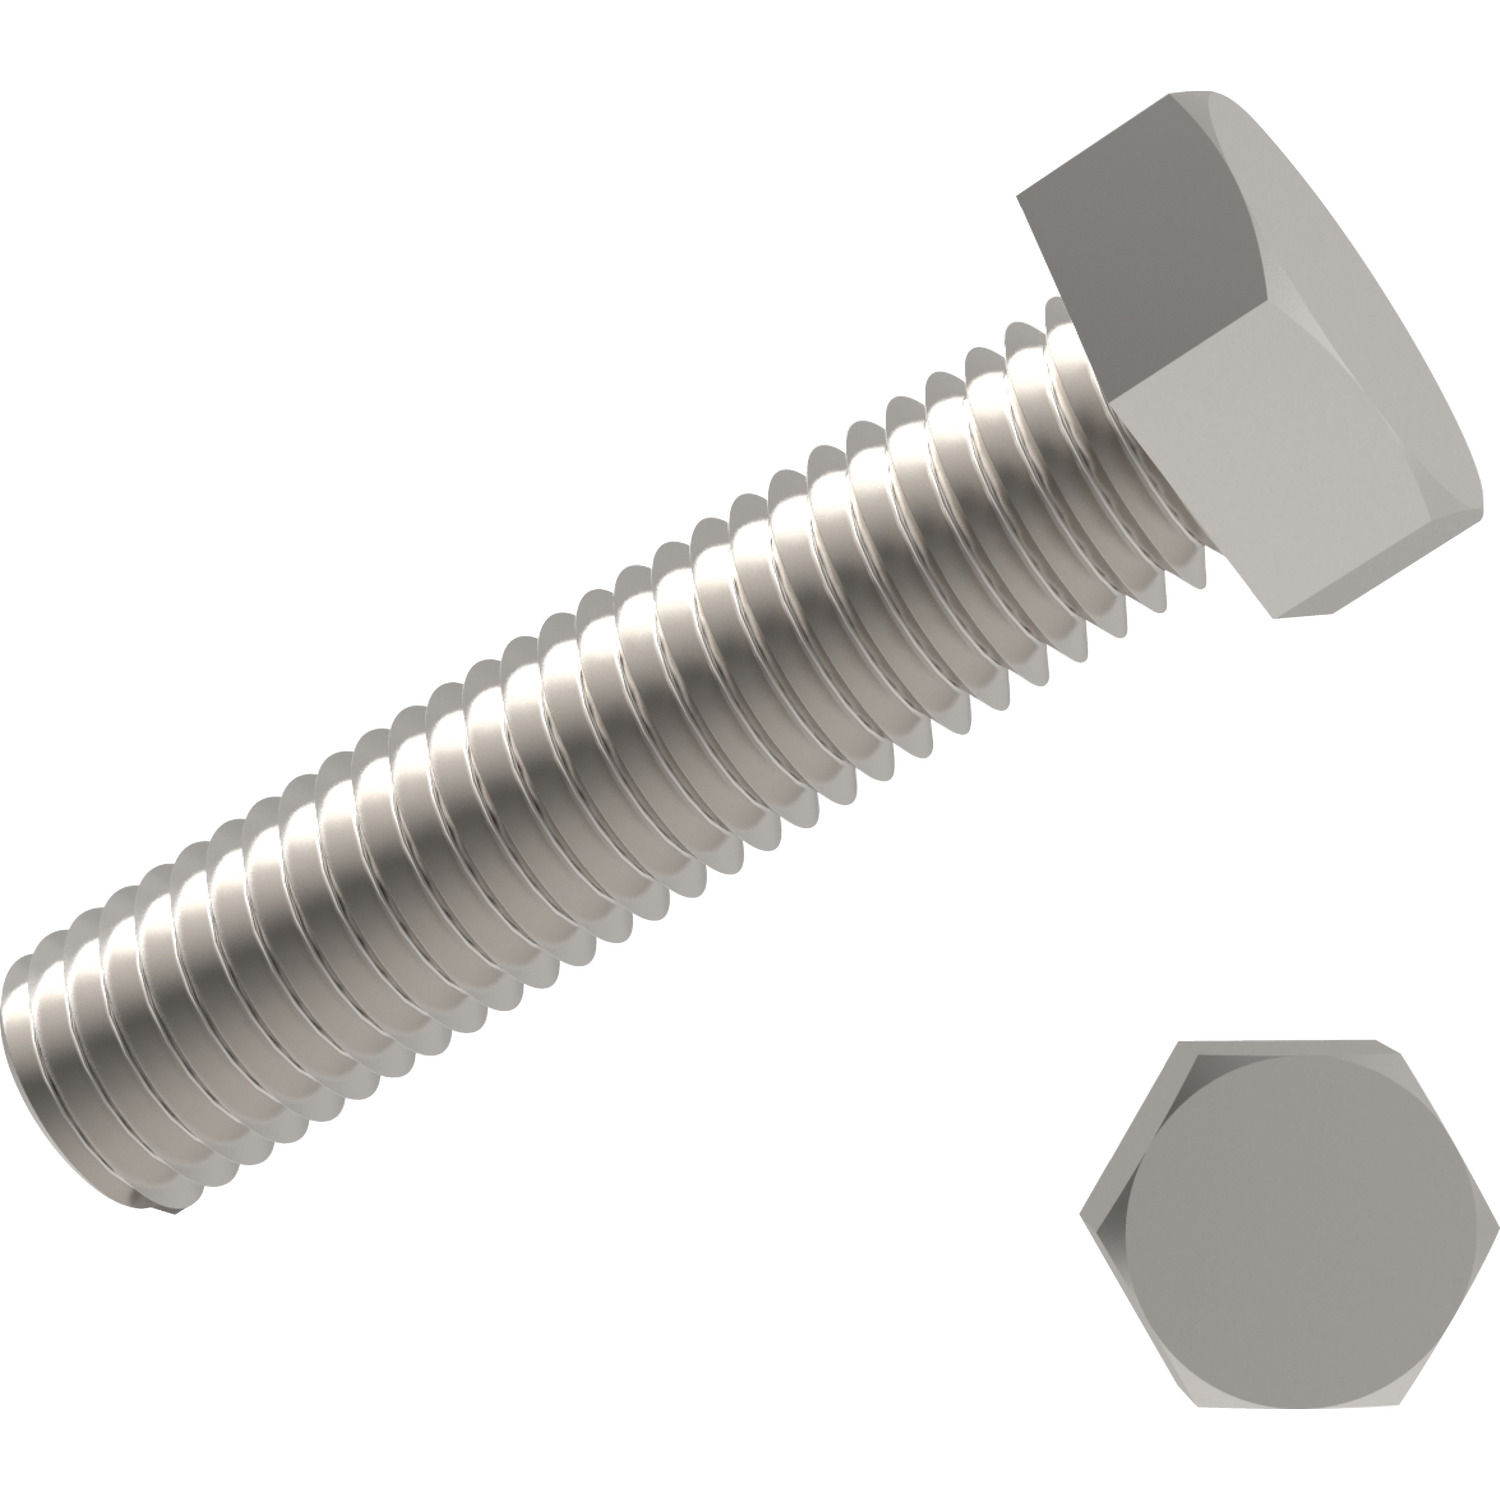 Hexagon Head Set Screws A2 stainless steel hexagon head set screws. Manufactured to DIN 933, ISO 4017. Sizes range from M2 to M36.